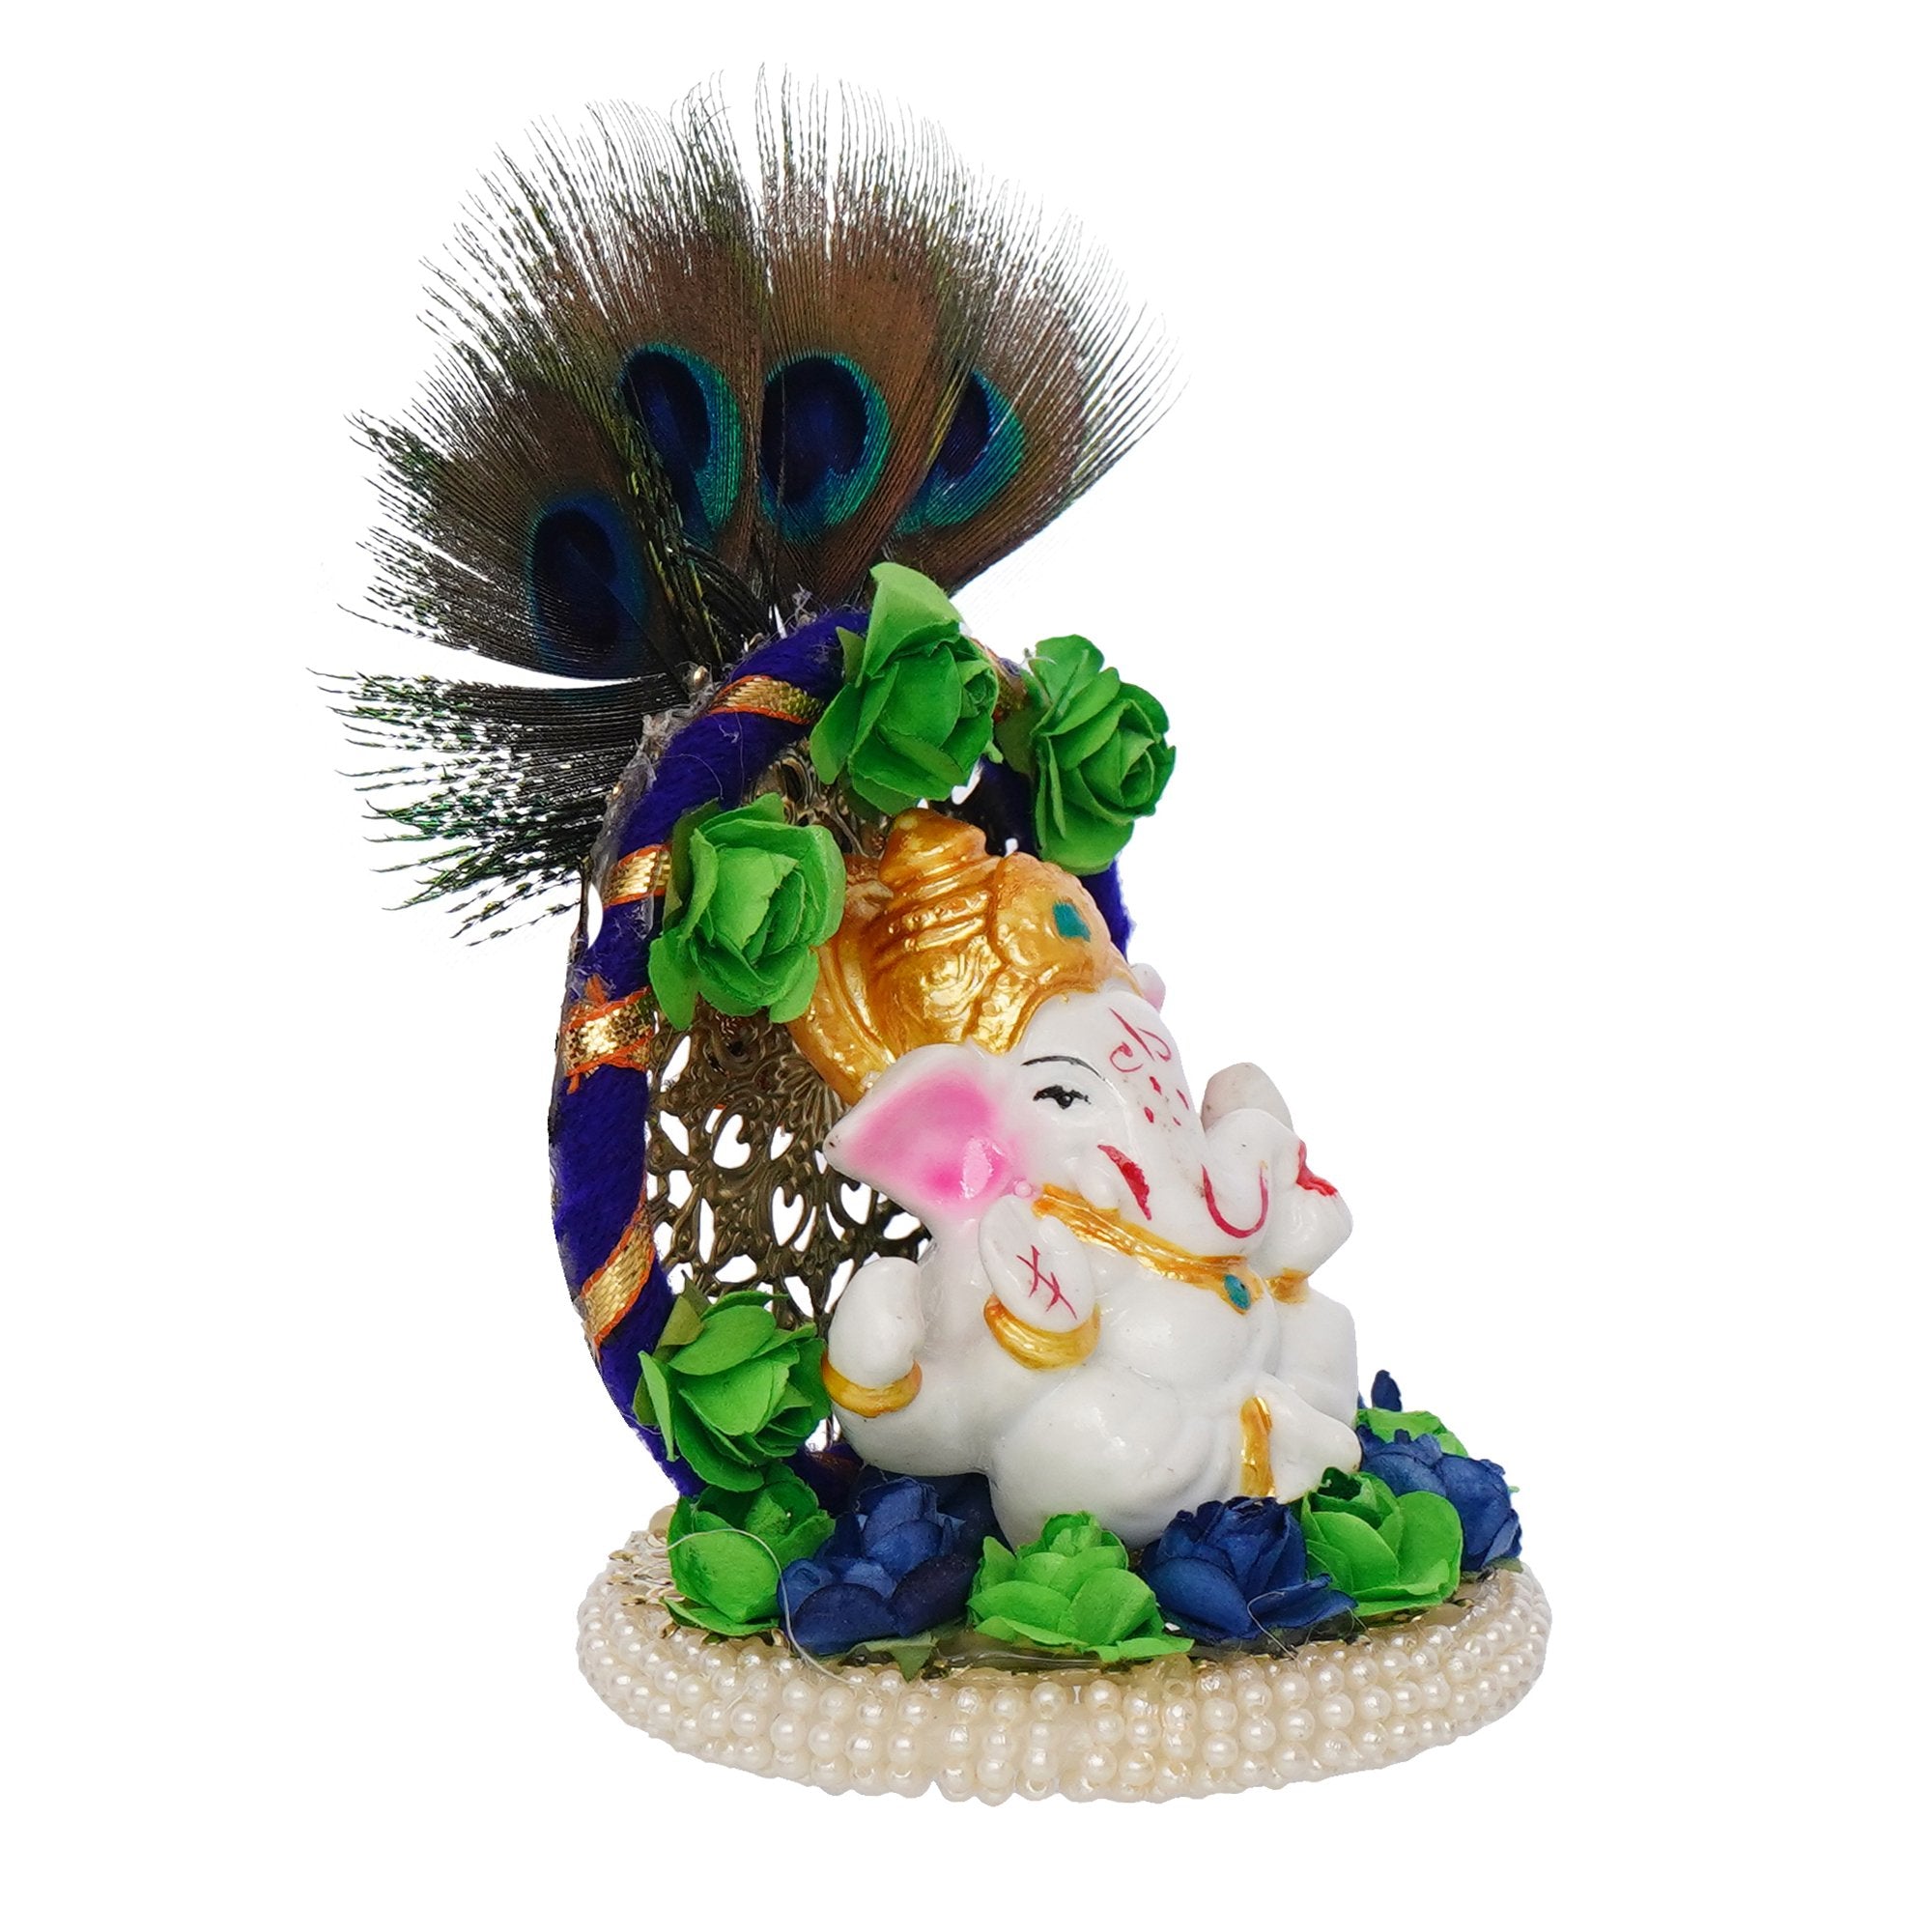 Polyresin Lord Ganesha Idol on Handcrafted Peacock Feather Floral Plate for Home and Car Dashboard 4